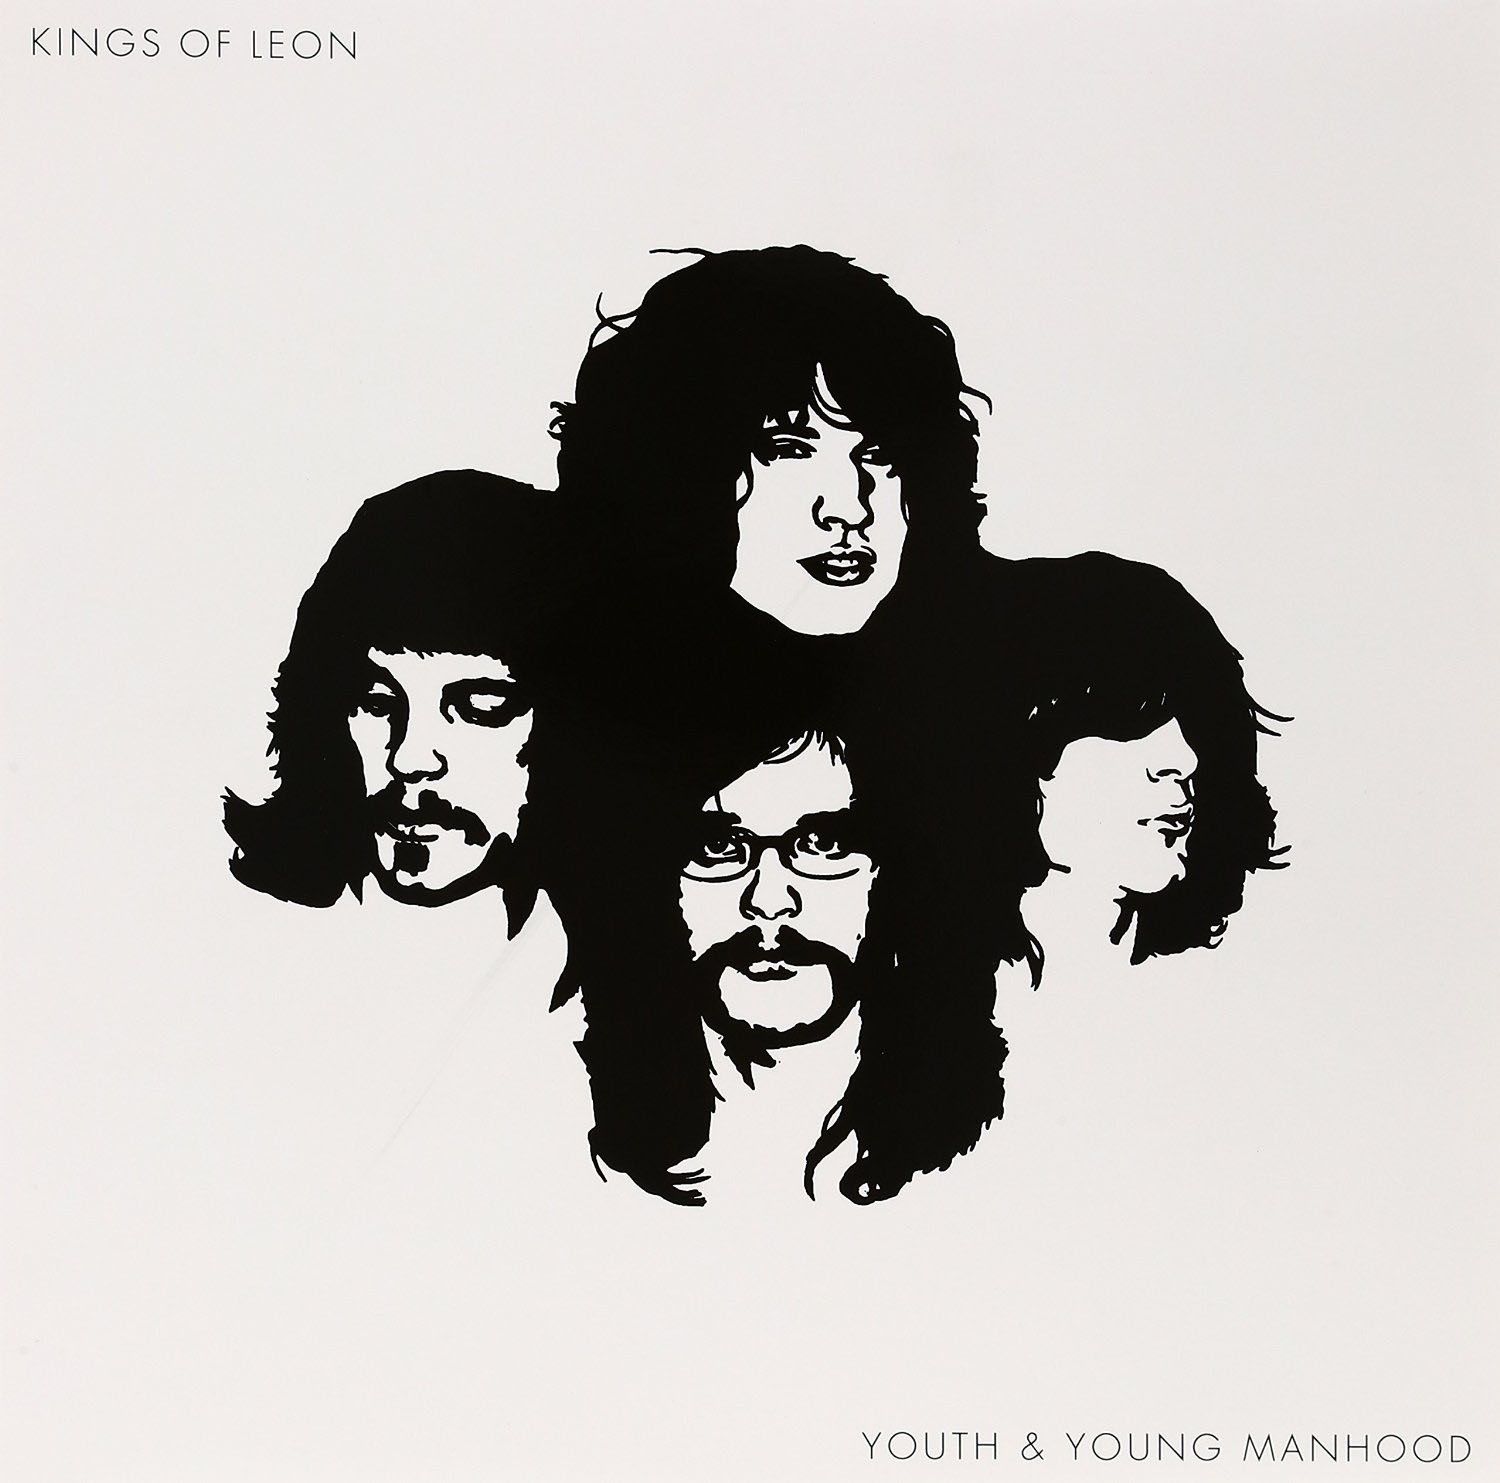 KINGS OF LEON – YOUTH & YOUNG MANHOOD ON